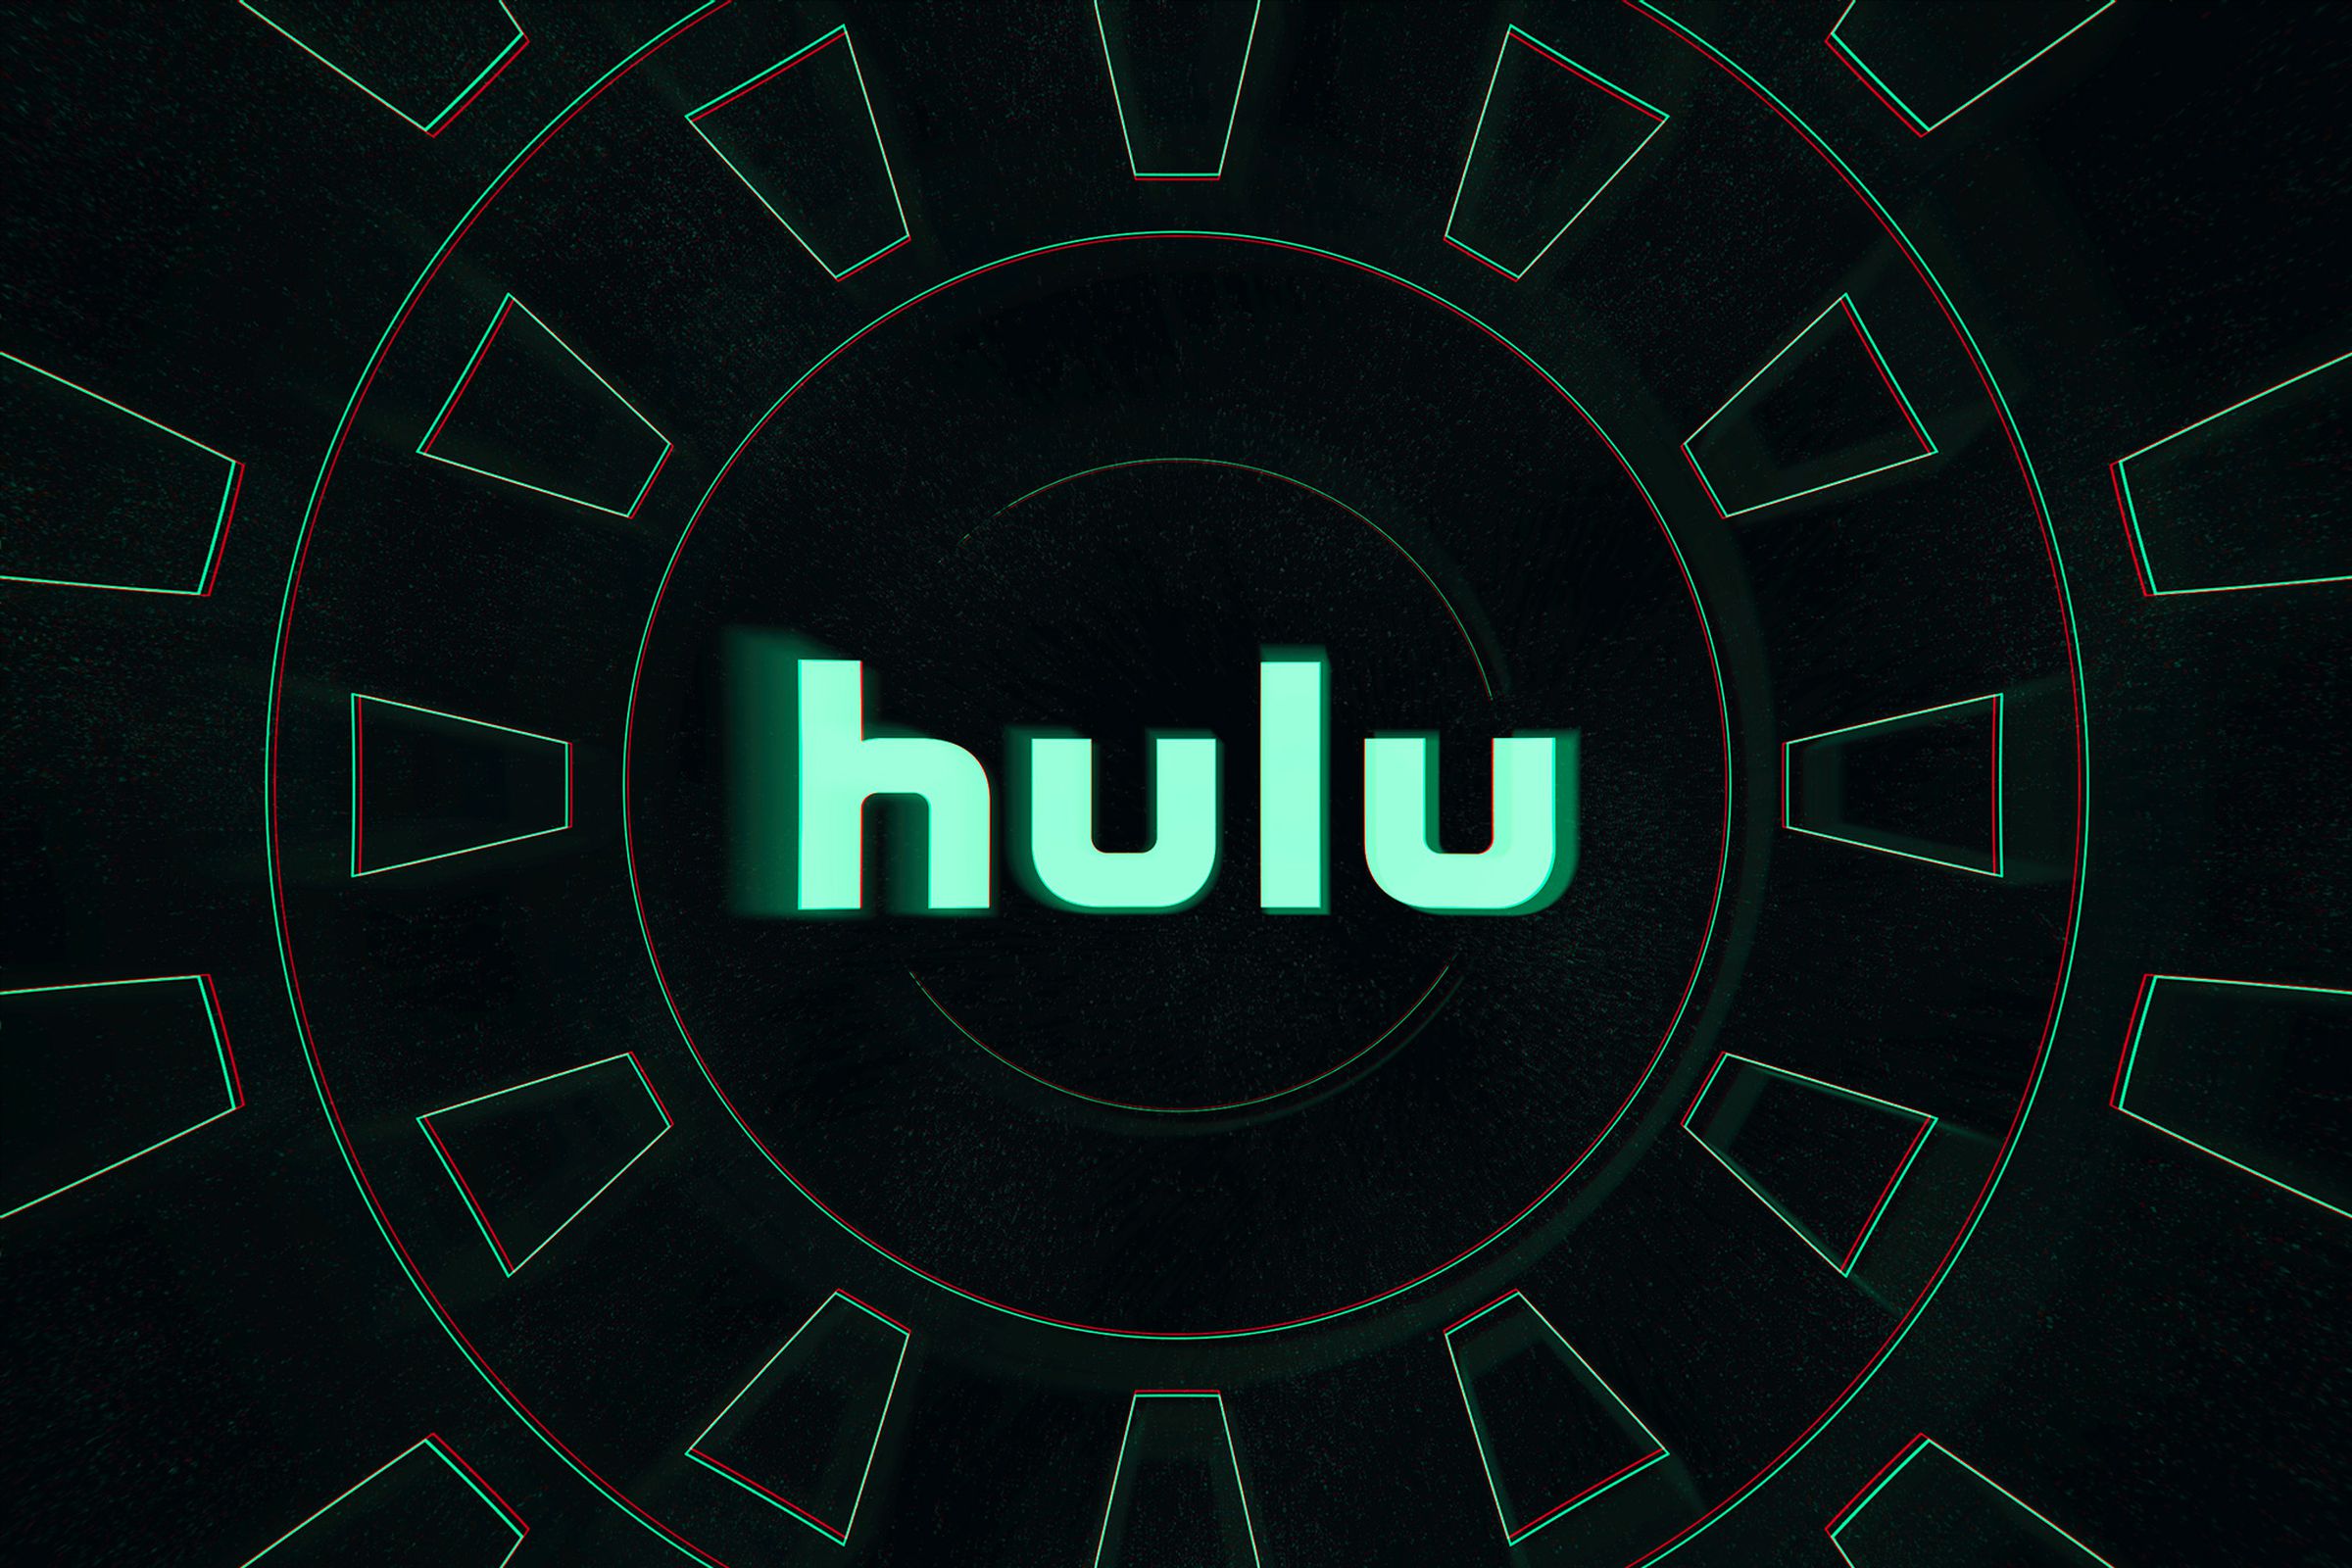 The word hulu against a black background with light green circles radiating out.